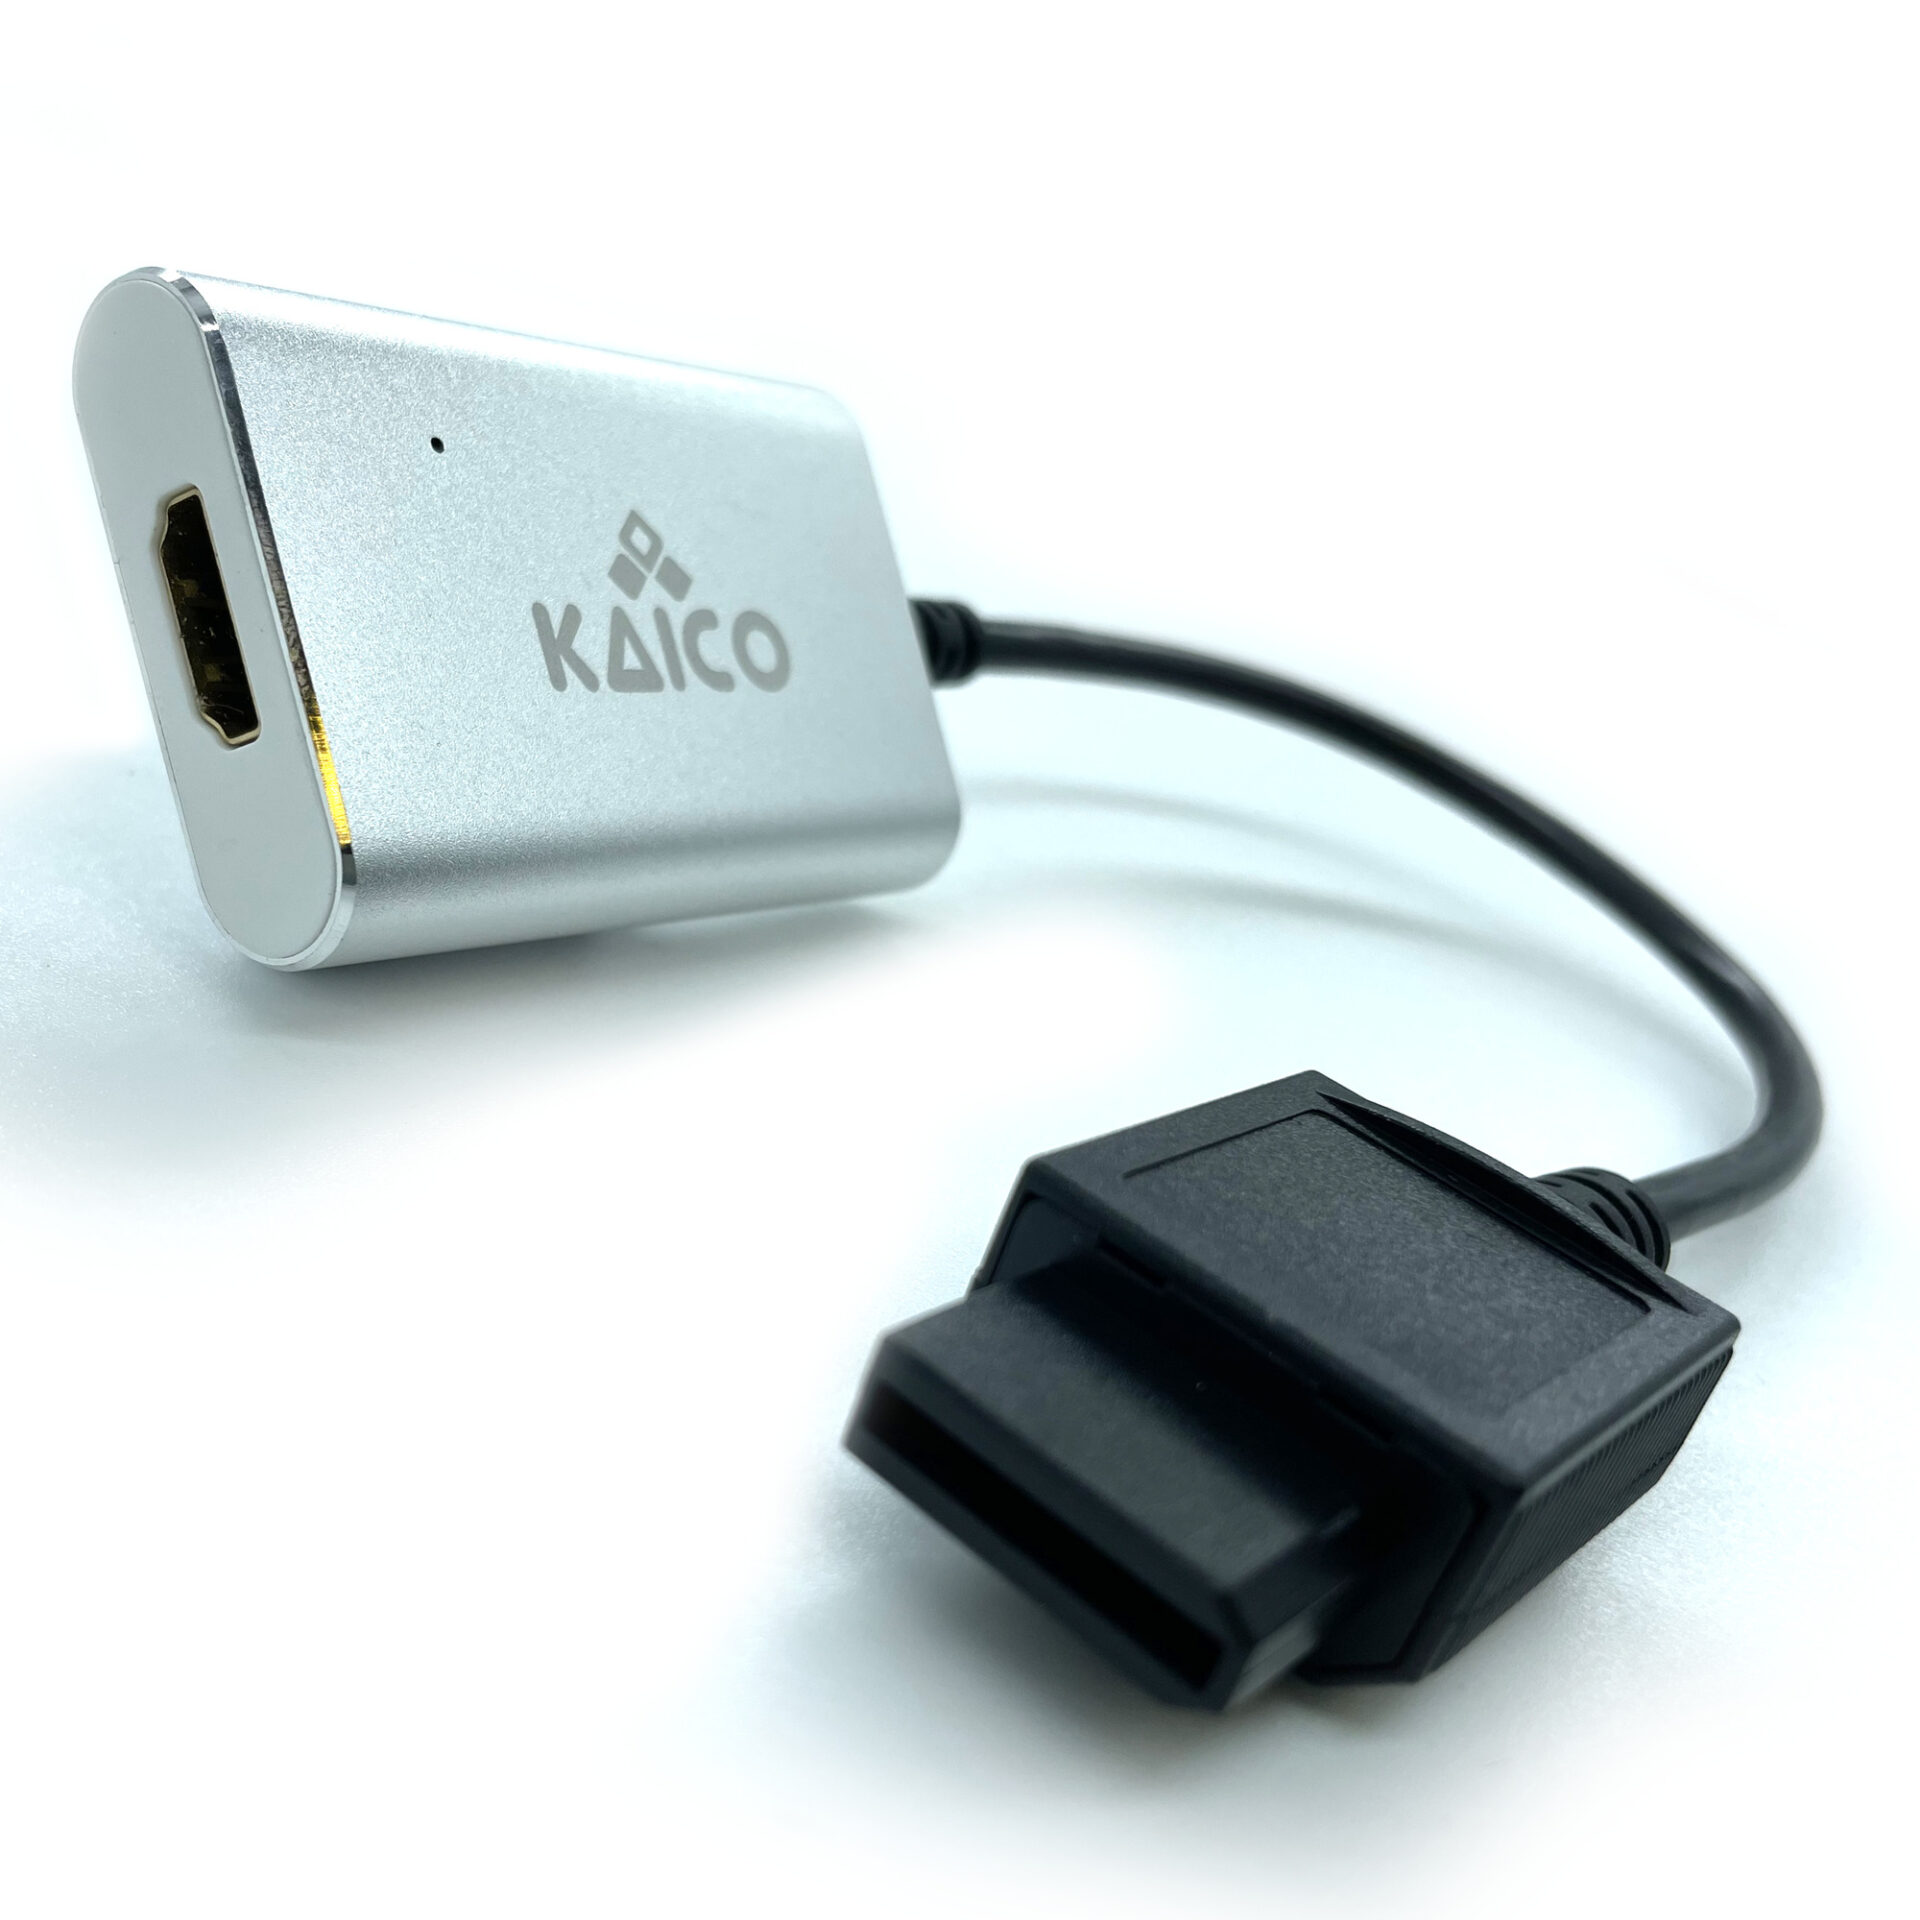 Kaico Wii HDMI Adapter for use with Nintendo Wii Consoles - Supports  Component Output - A Simple Plug & Play by Kaico for Nintendo Wii consoles